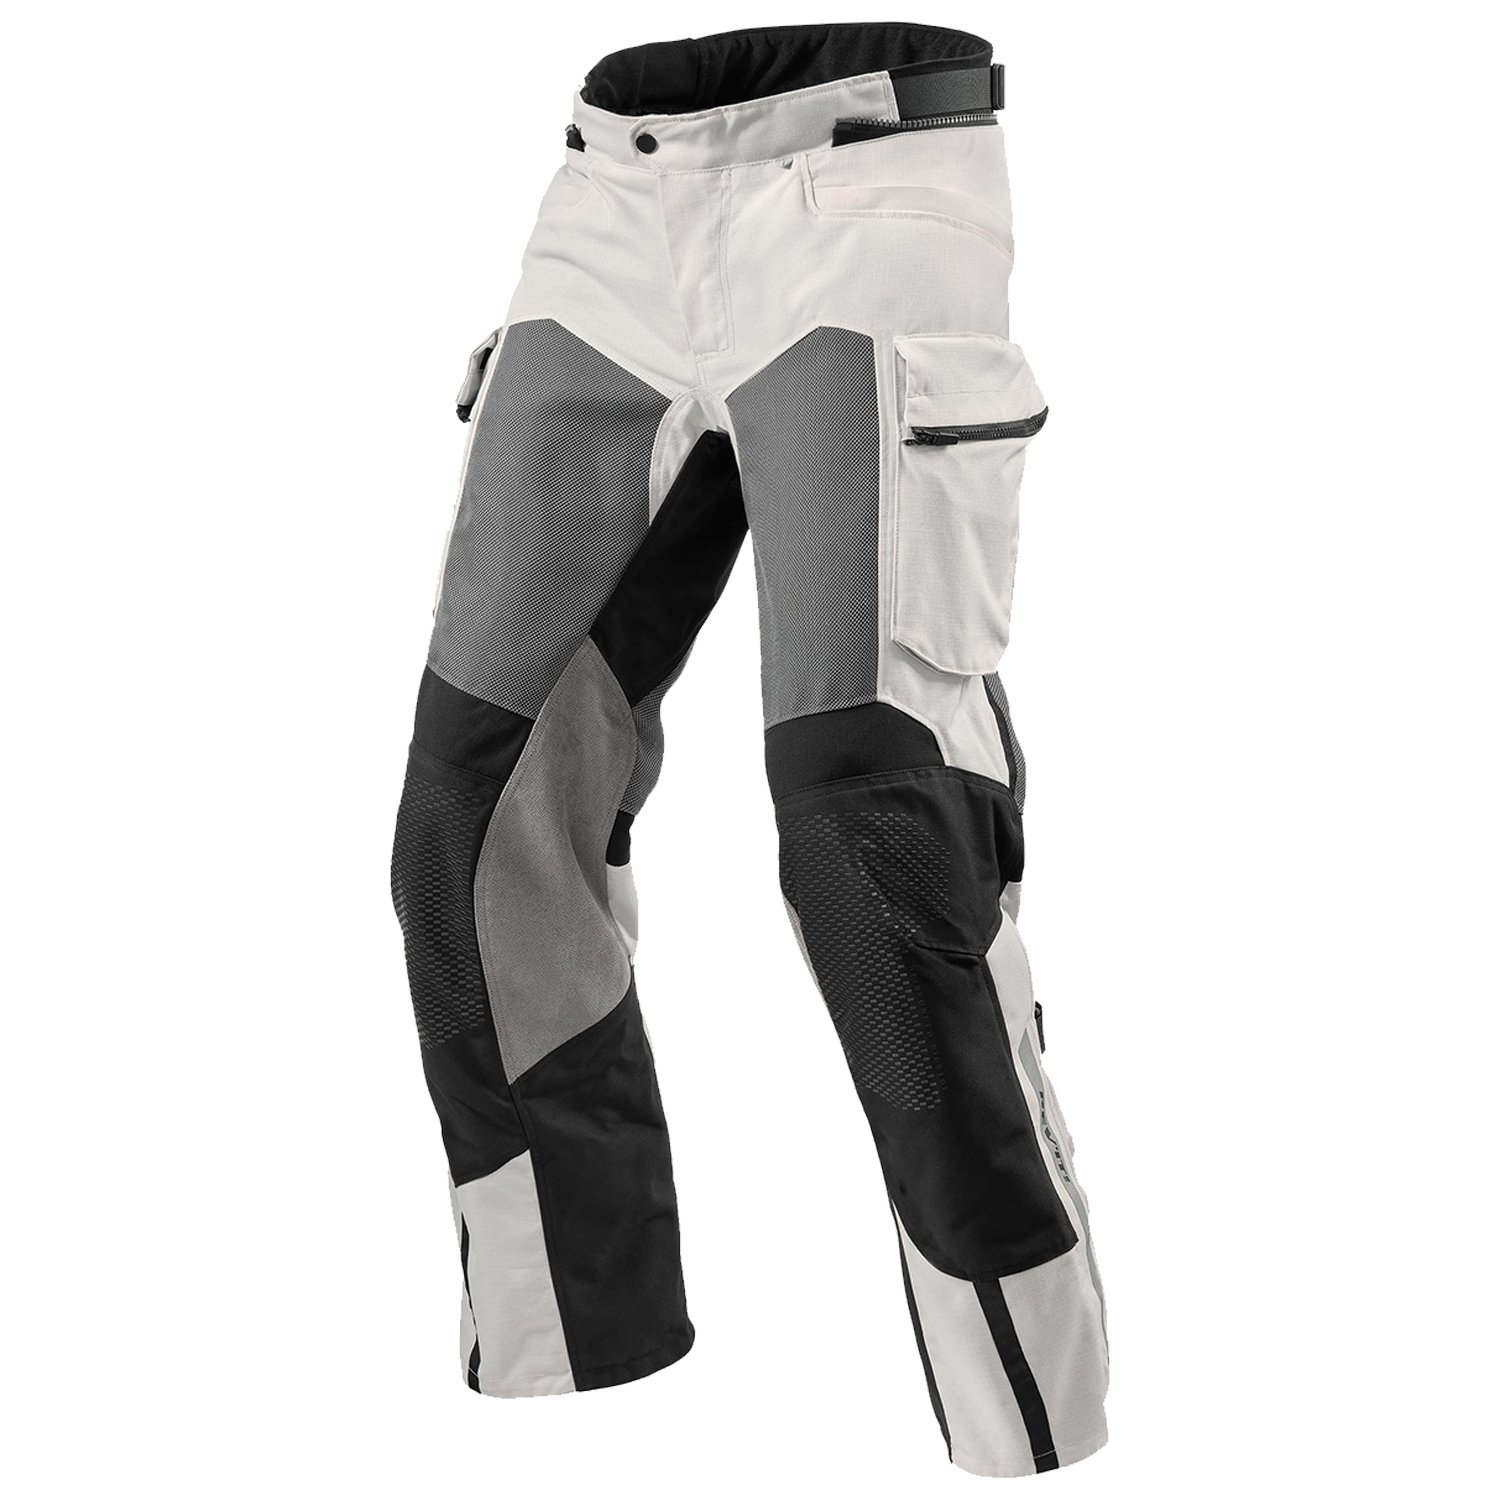 Image of REV'IT! Cayenne 2 Silver Motorcycle Pants Size M ID 8700001335454